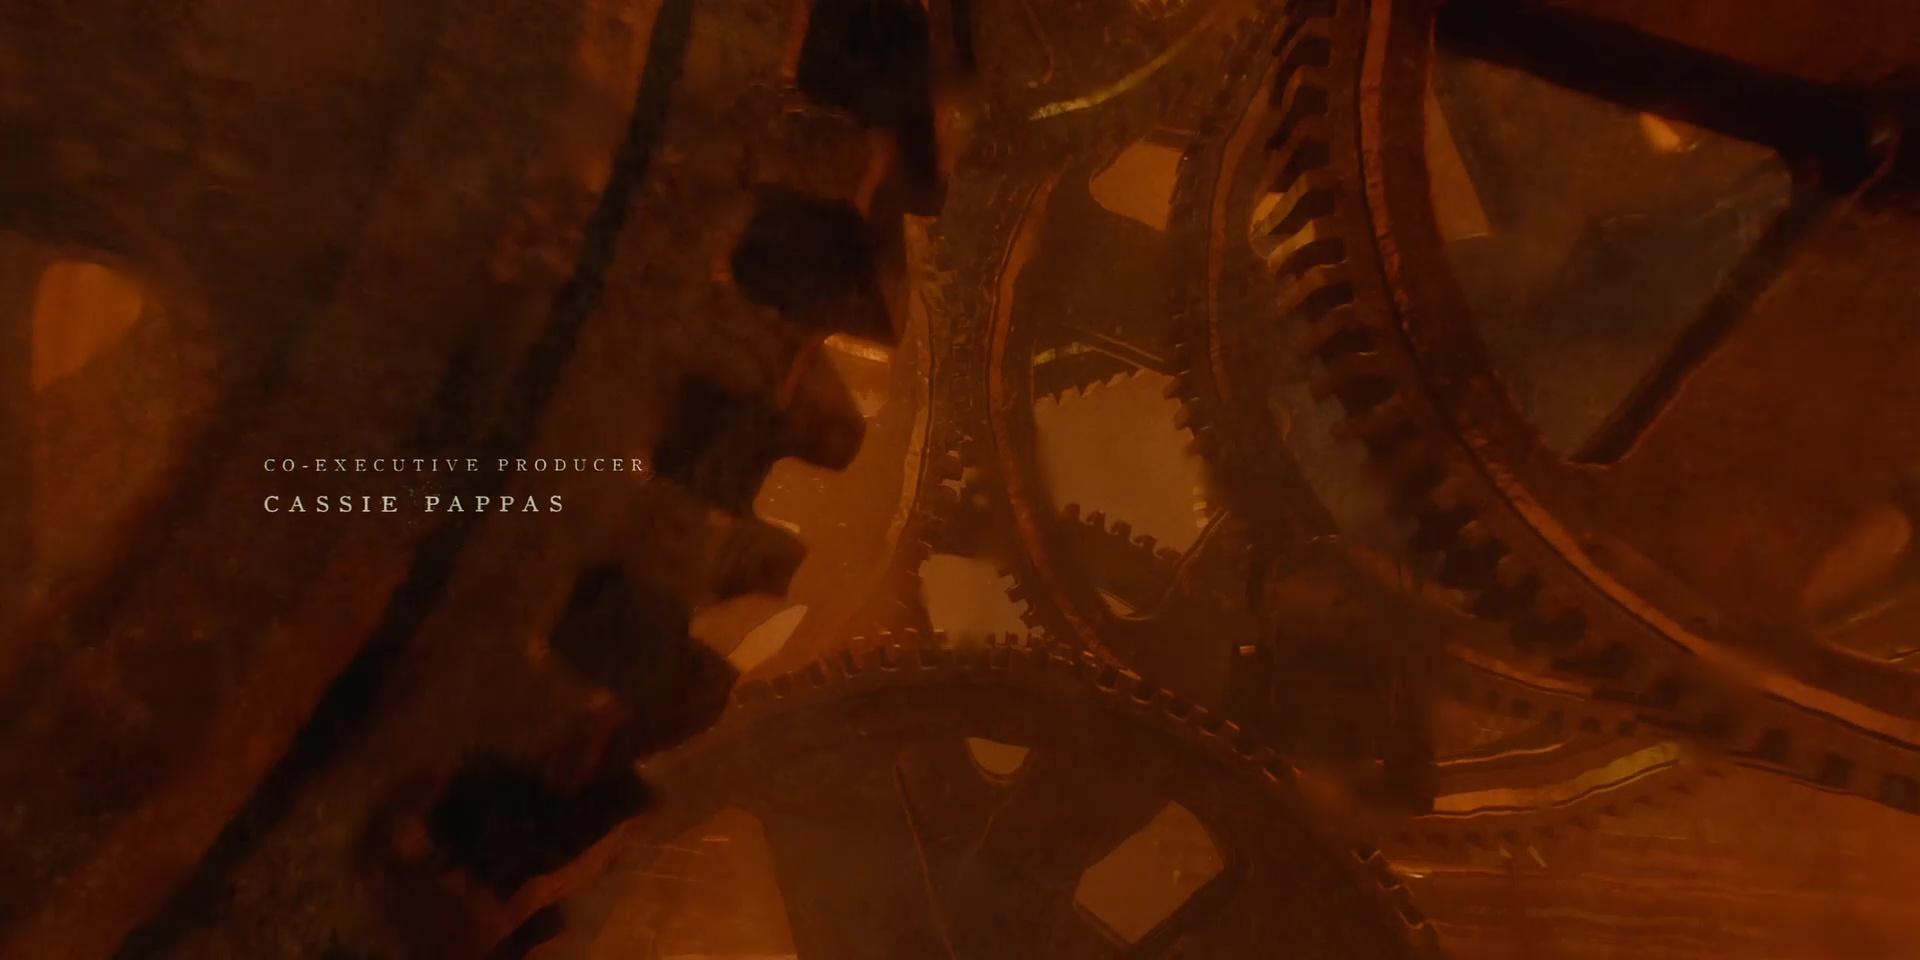 Many cogs whirl in a firey light.